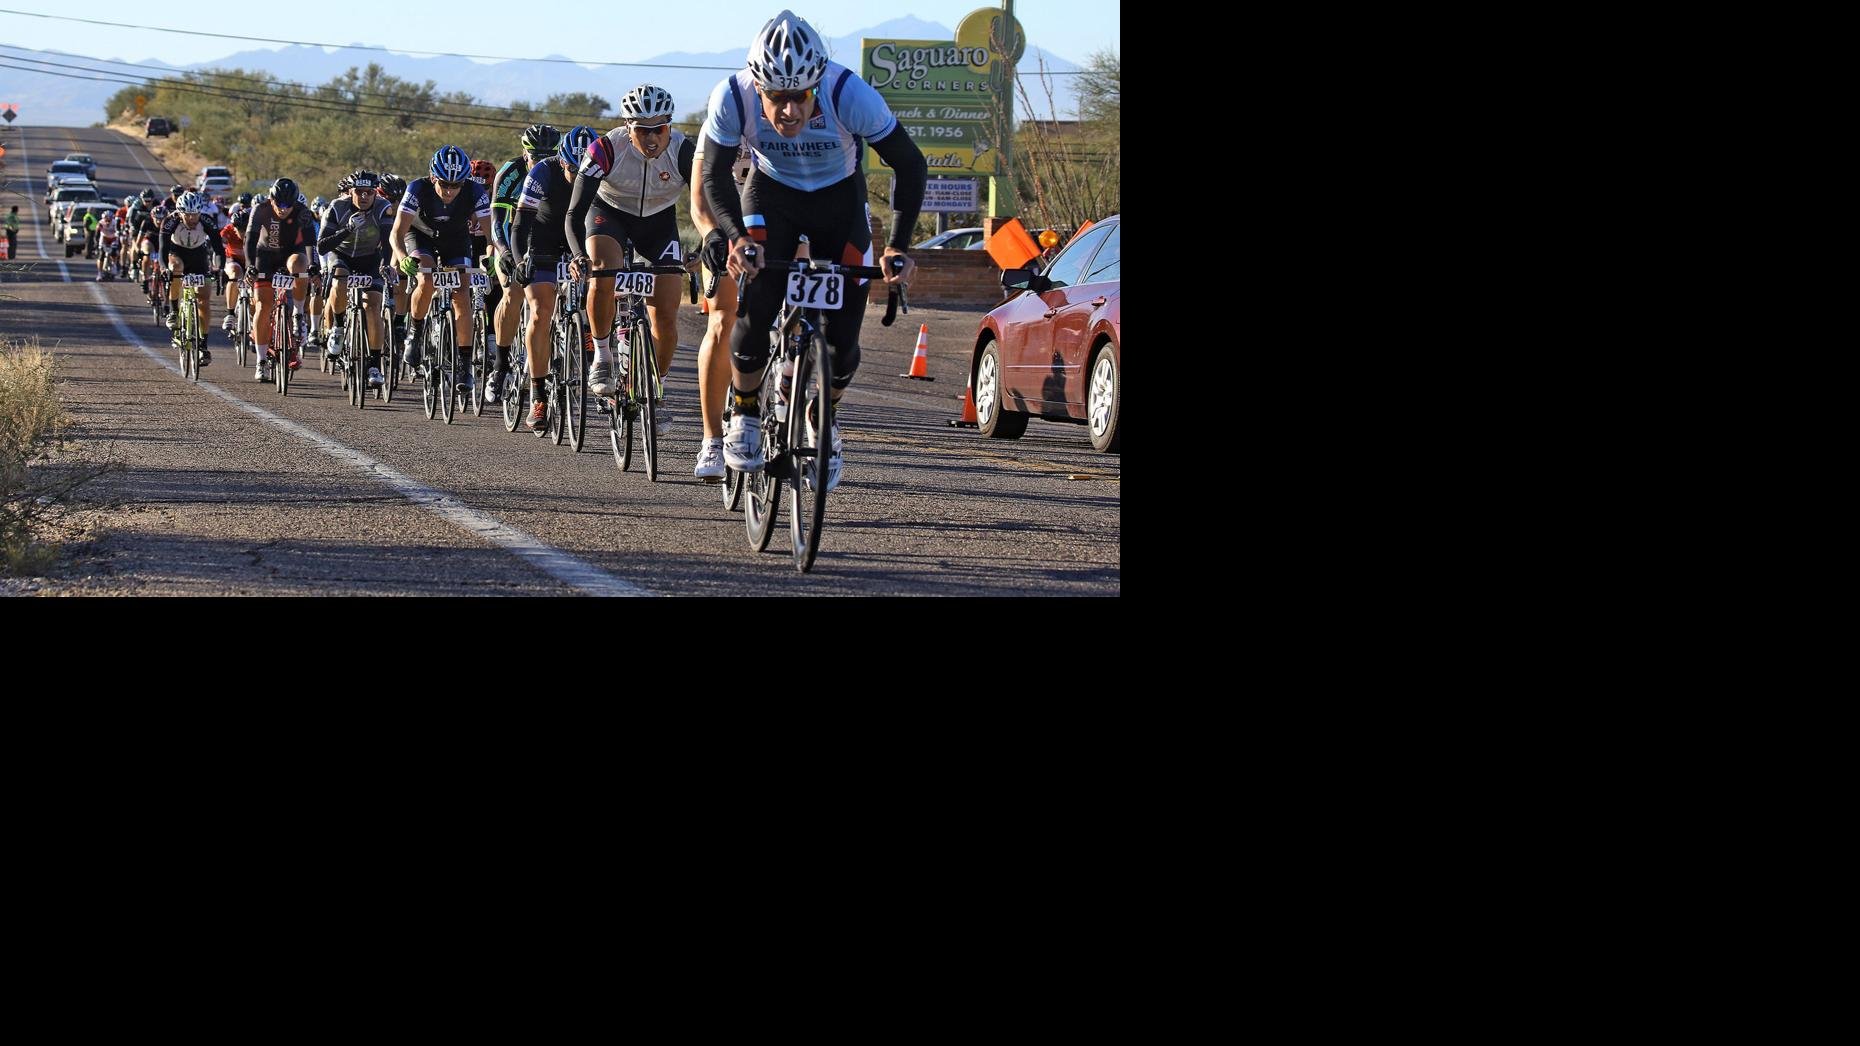 Tucson weather Perfect conditions for a bike race